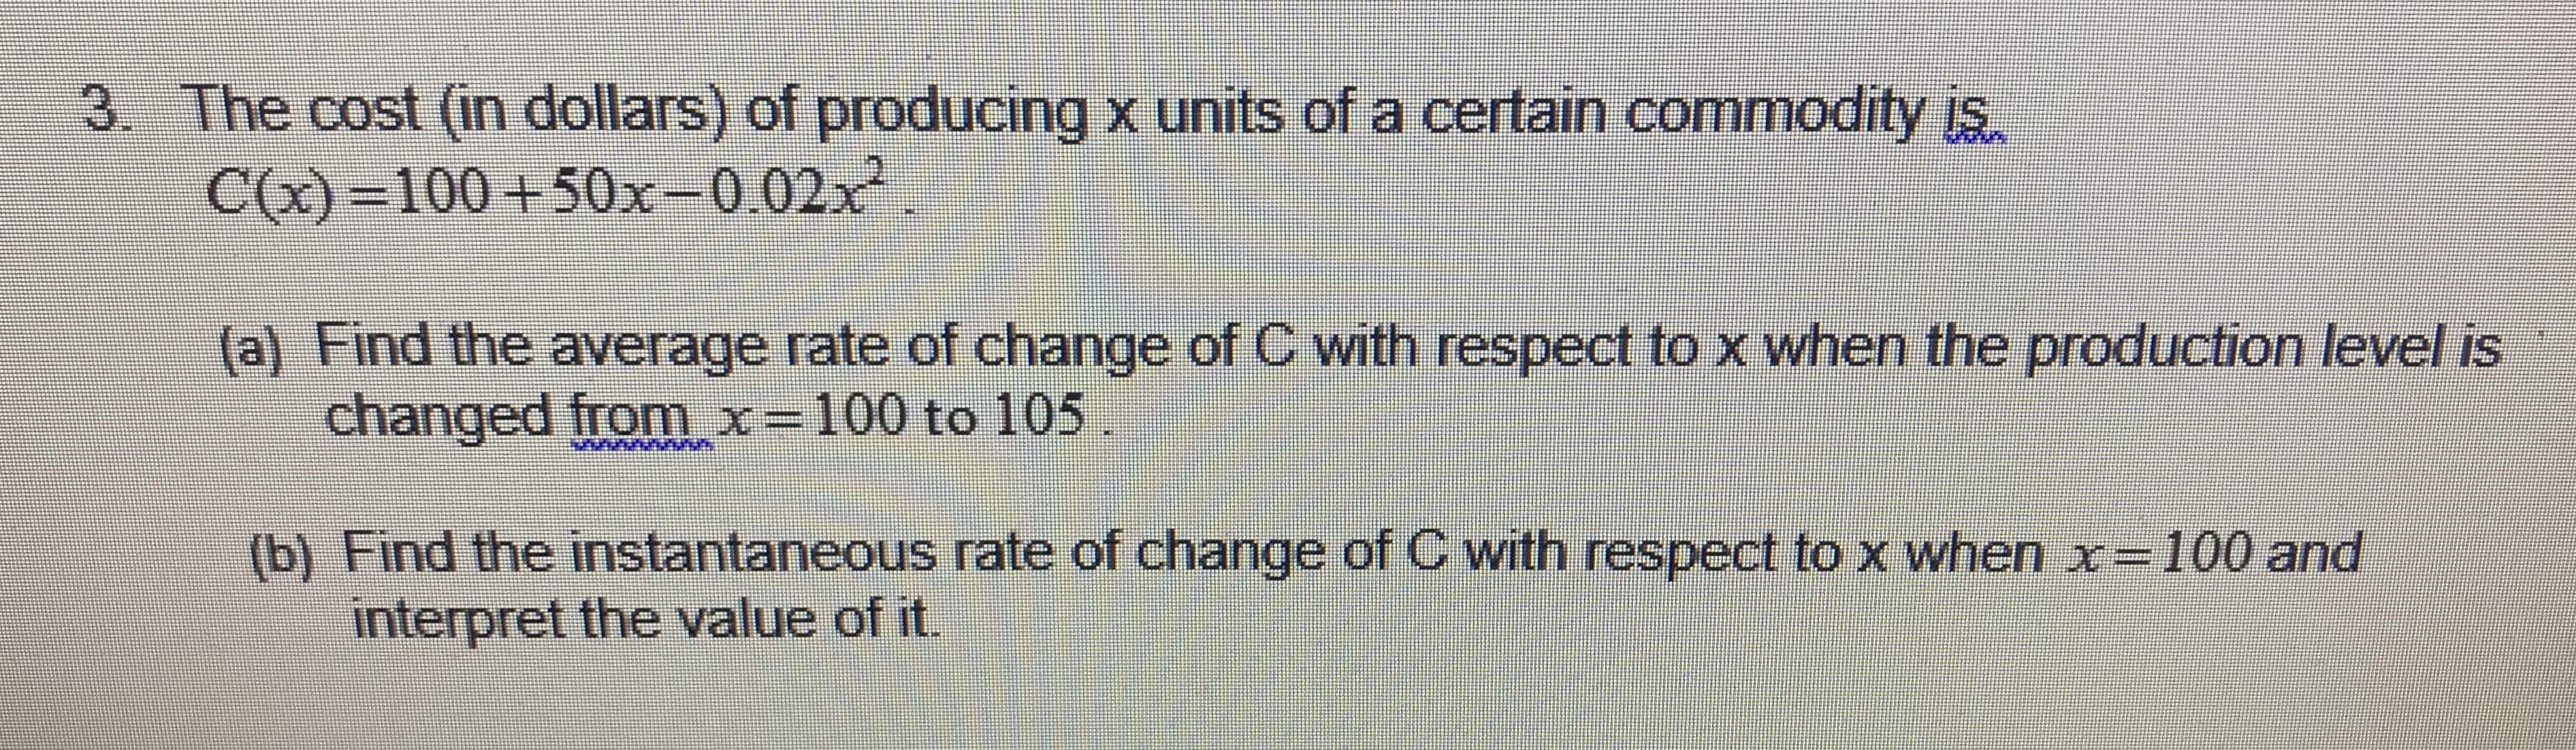 3. The cost (in dollars) of producing x units of a certain commodity is.
C()-100+50x-0.02x2
(a) Find the average rate of change of C with respect to x when the production level is
changed from x- 100 to 105
b) Find the instantaneous rate of change of C with respect to x when x- 100 and
interpret the value of it.
